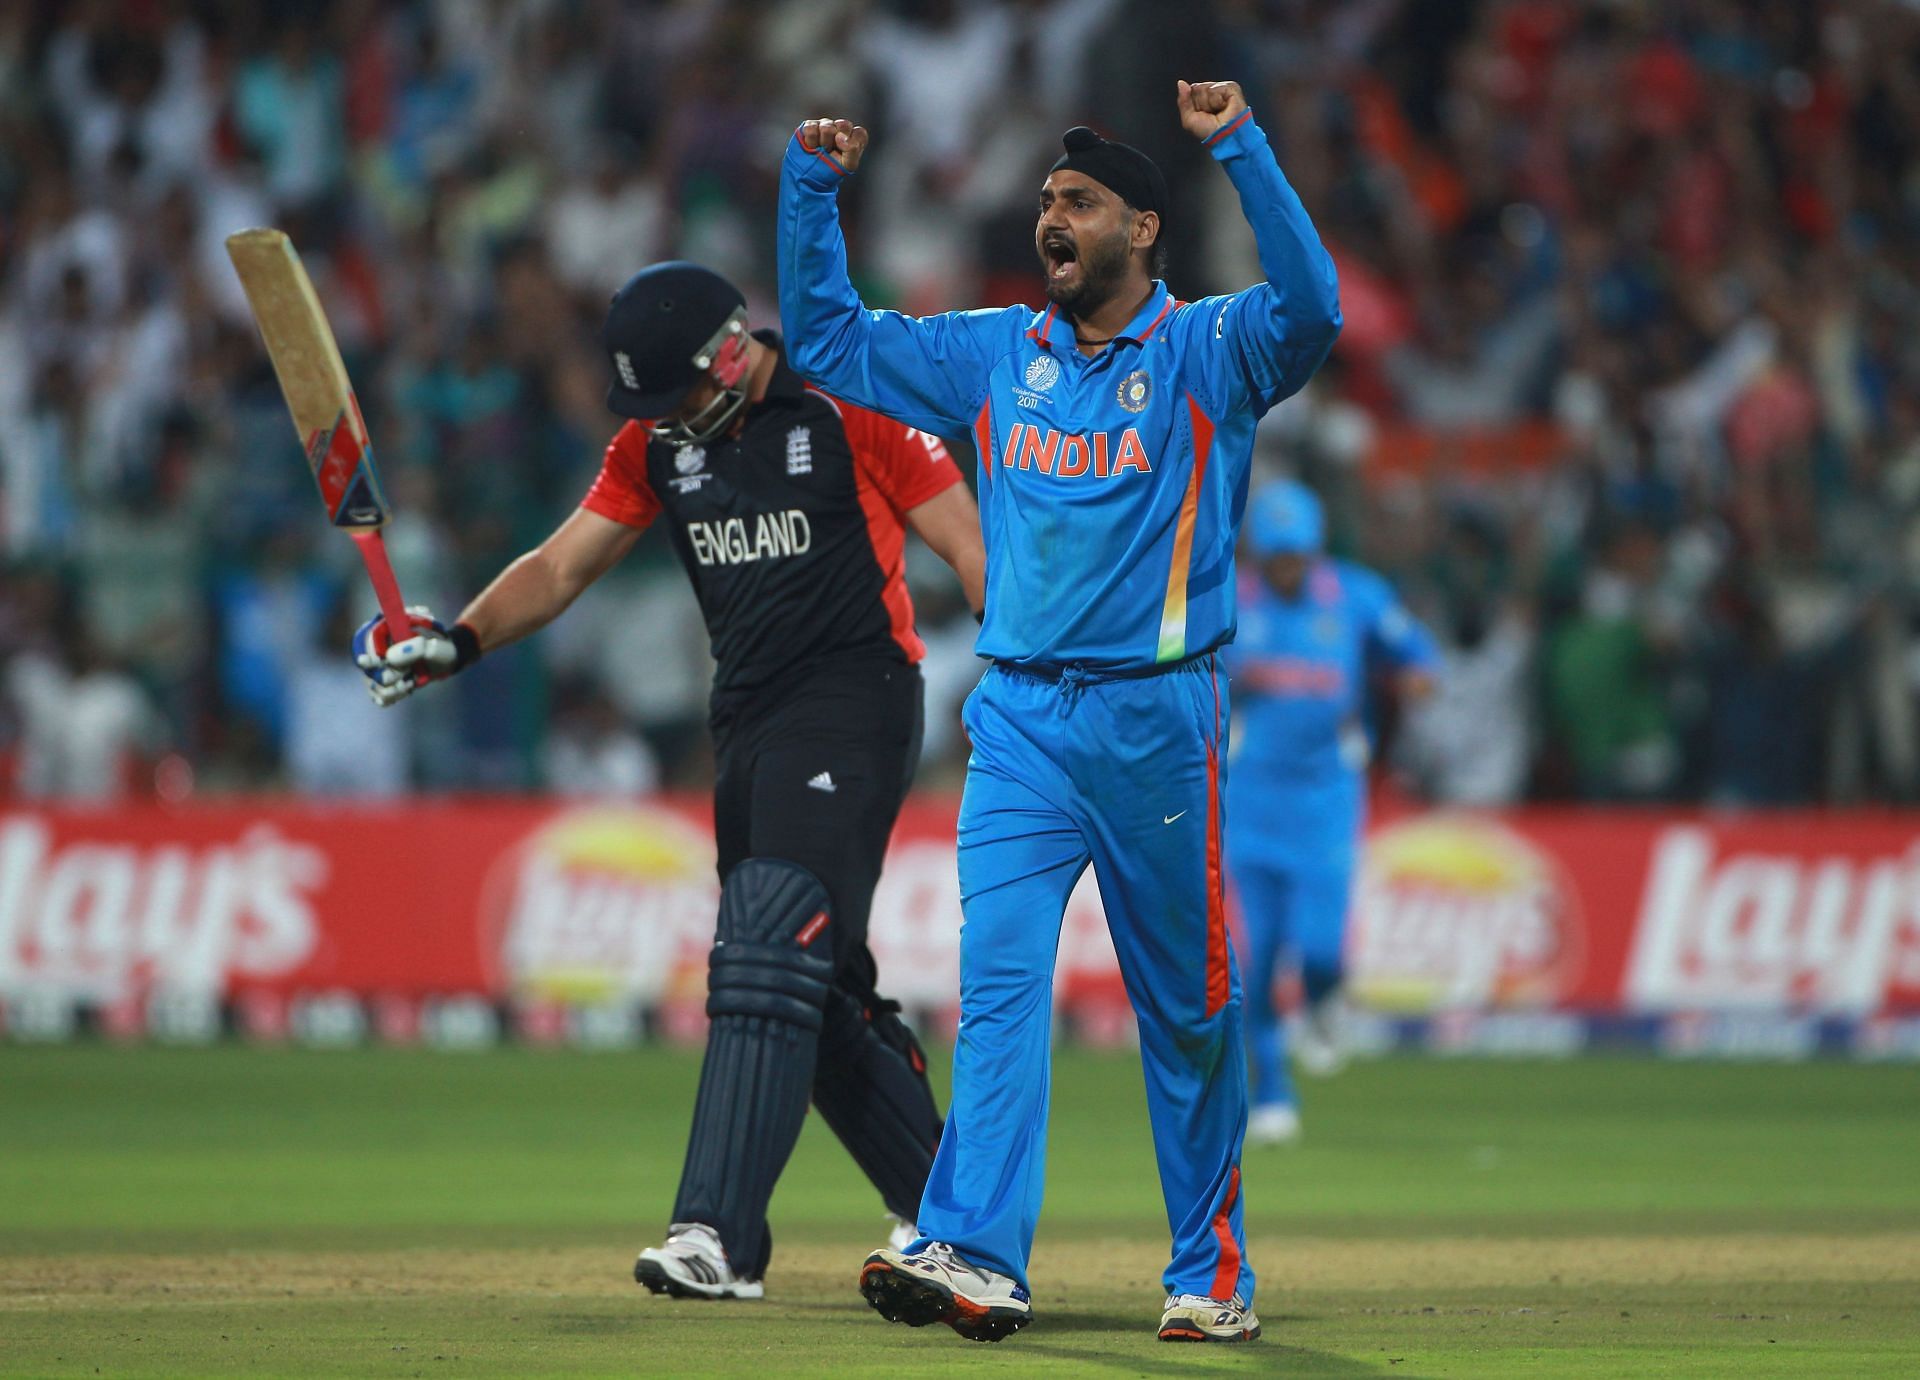 Harbhajan Singh played his last international match for India in 2016